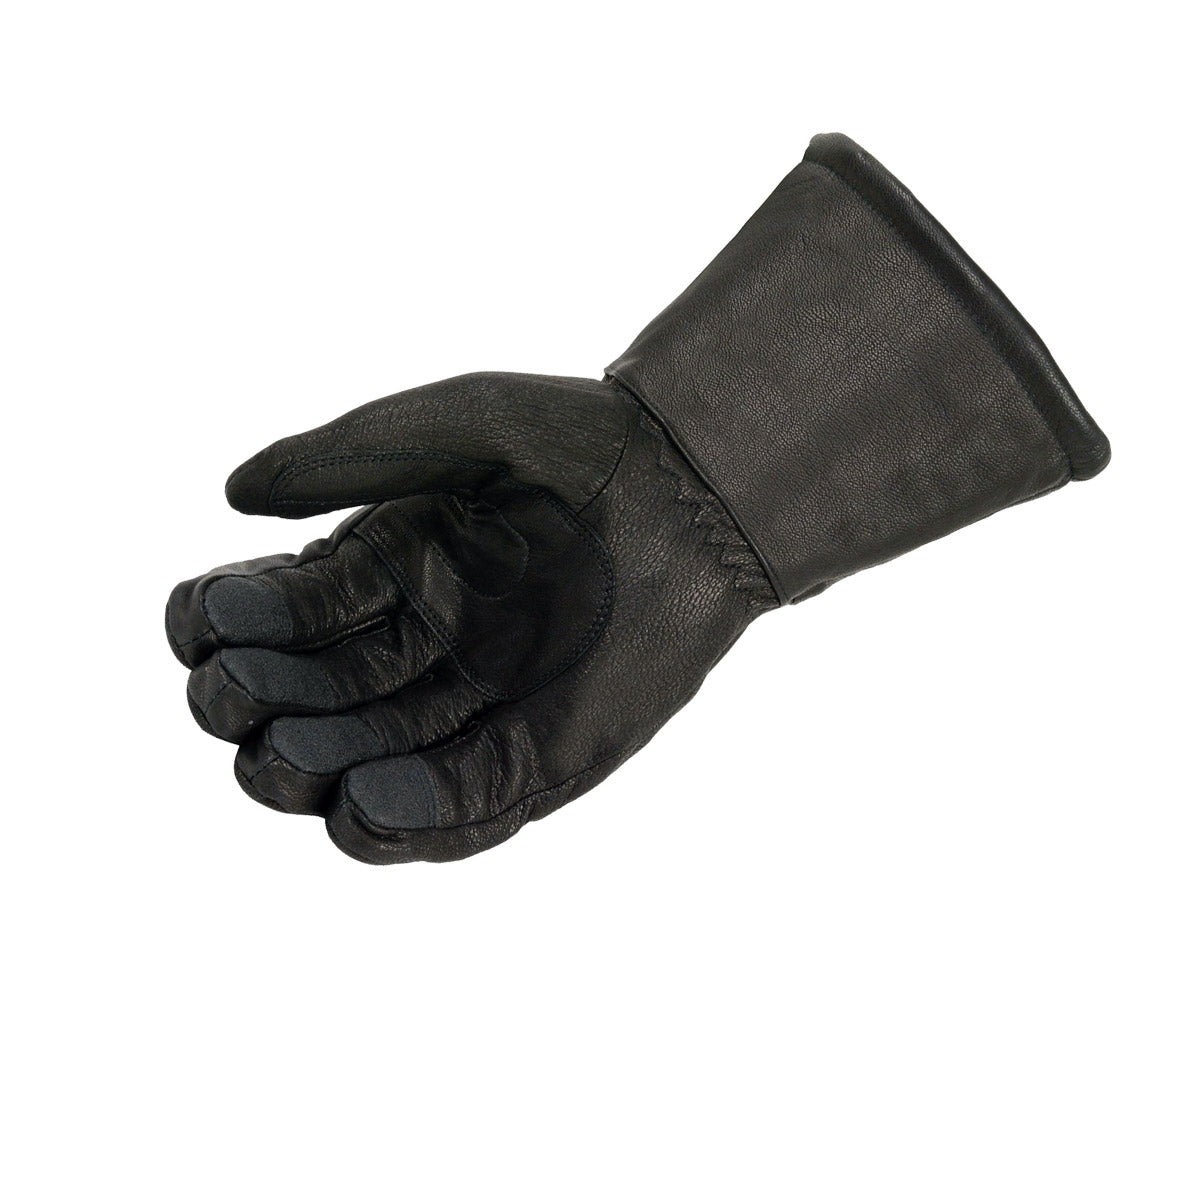 Milwaukee Leather SH294 Men's Black Leather Waterproof Gauntlet Gloves with Stretch Knuckles